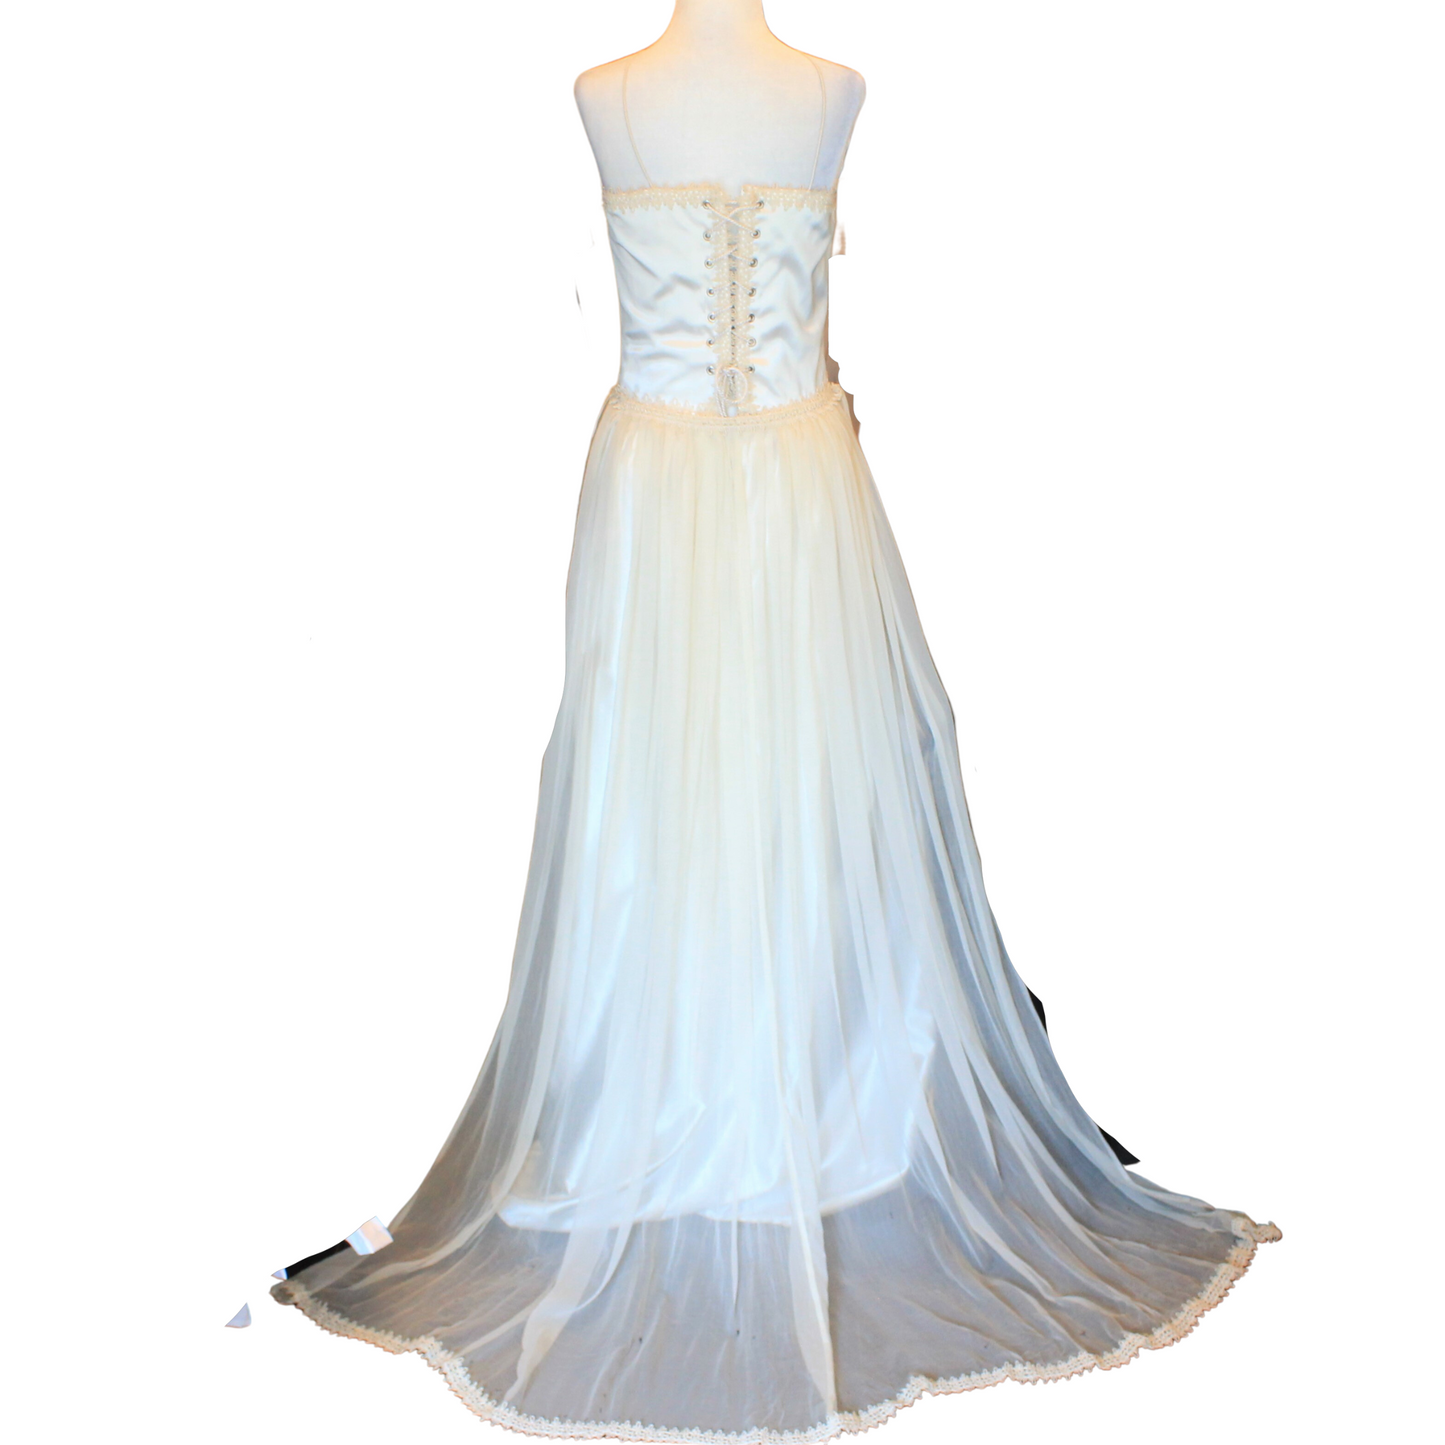 The VM Sweetheart Gown (One of a Kind)